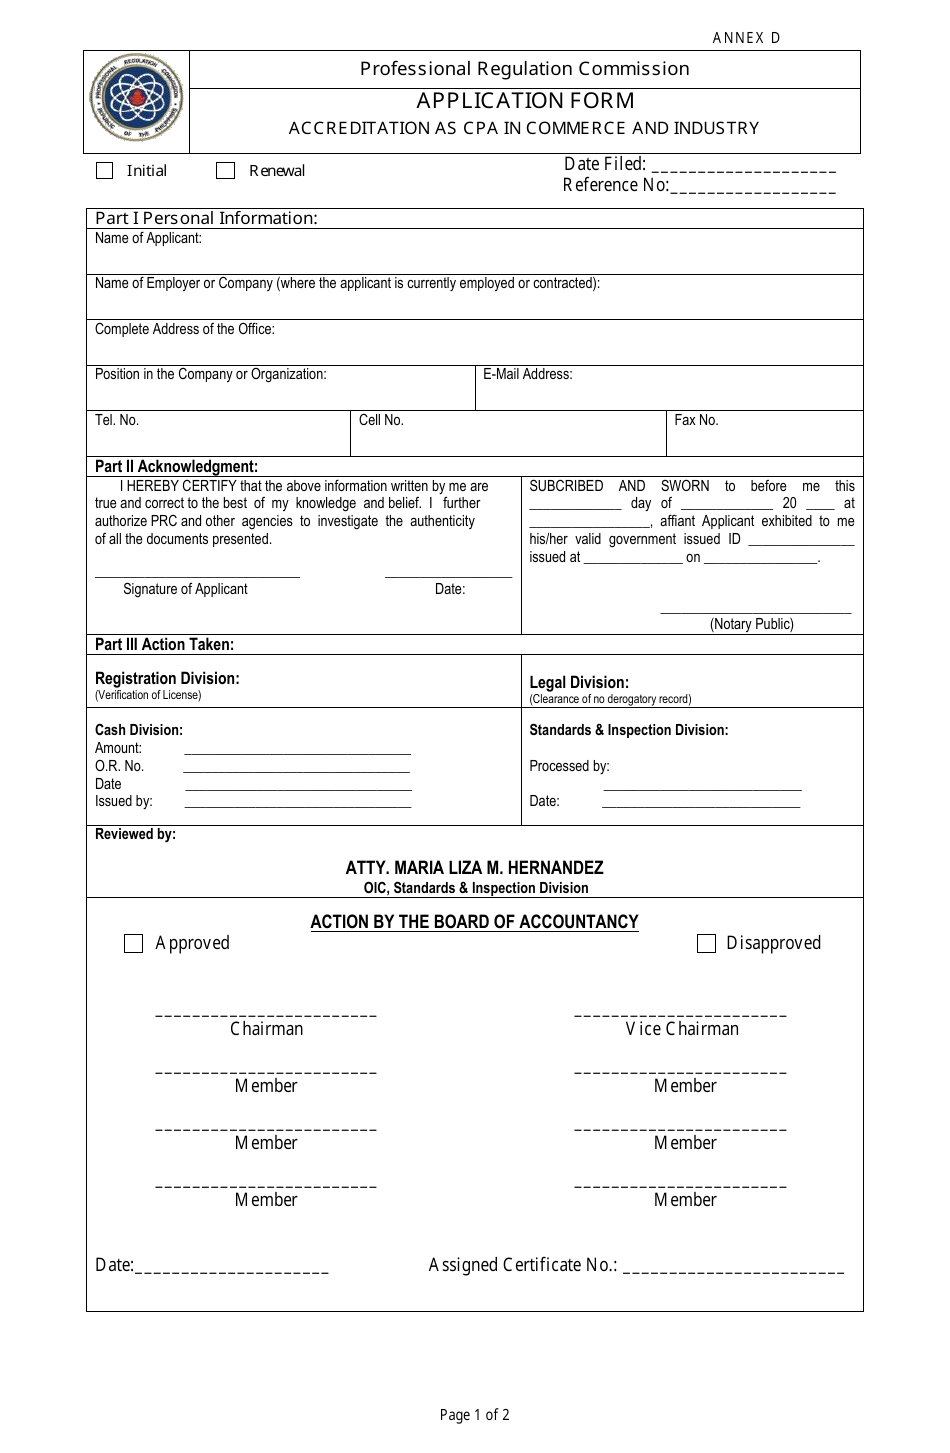 Application Form for Accreditation as CPA in Commerce and Industry - Philippines, Page 1